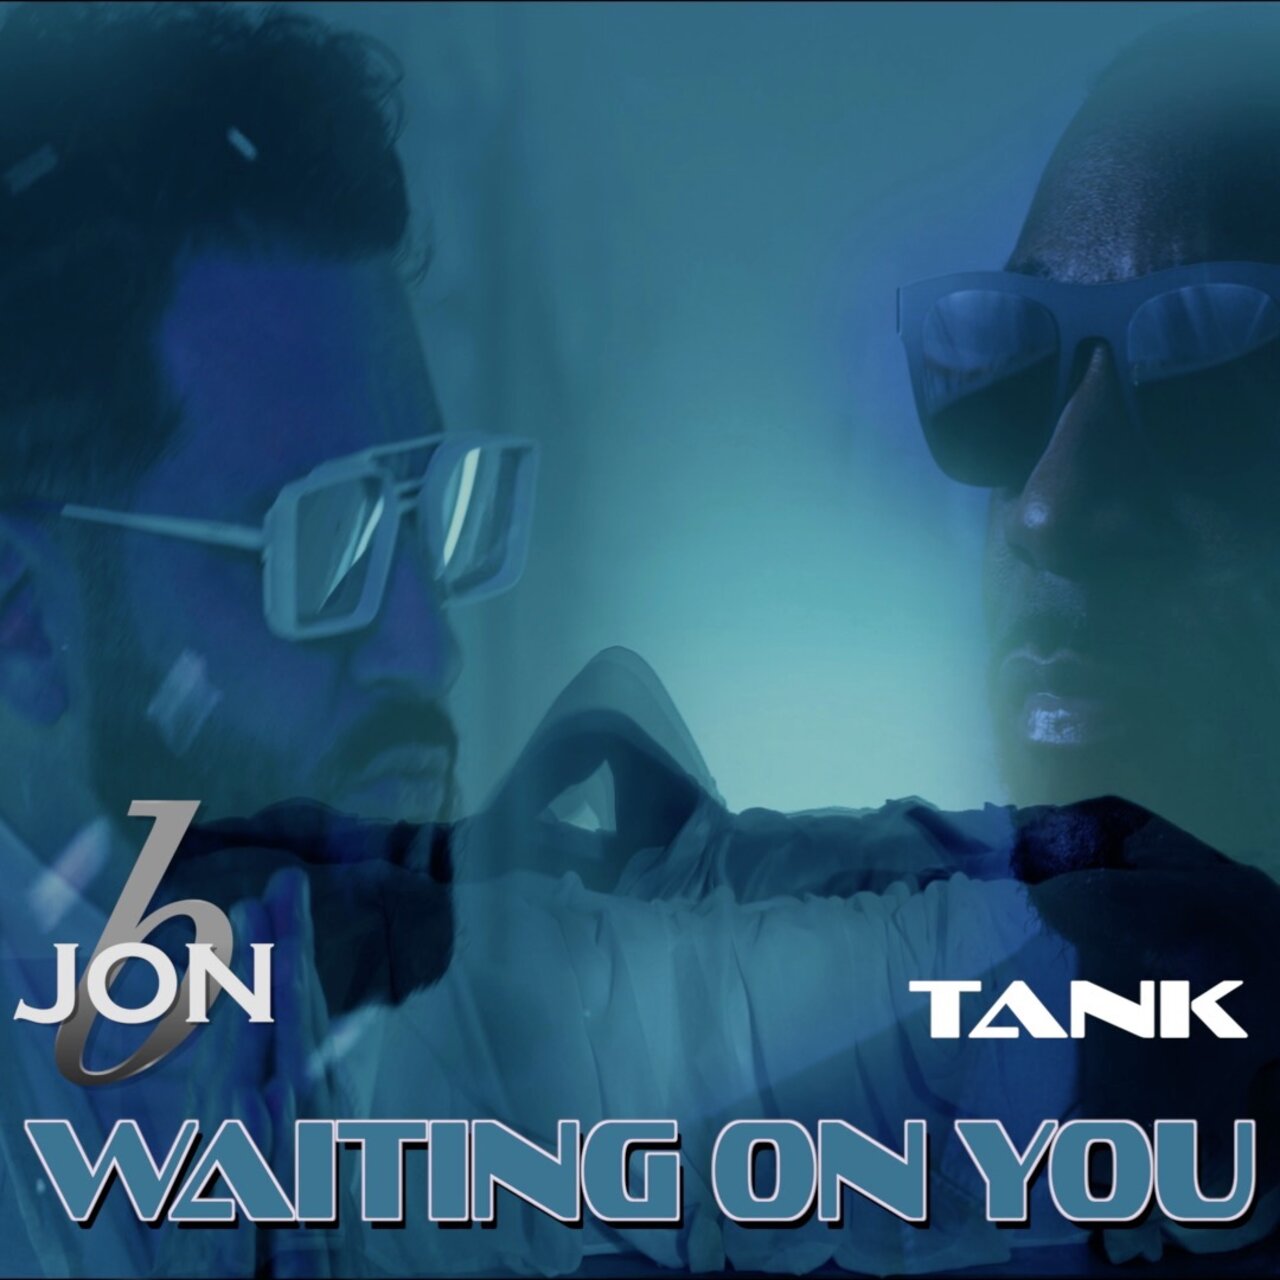 Jon B. featuring Tank — Waiting on You cover artwork